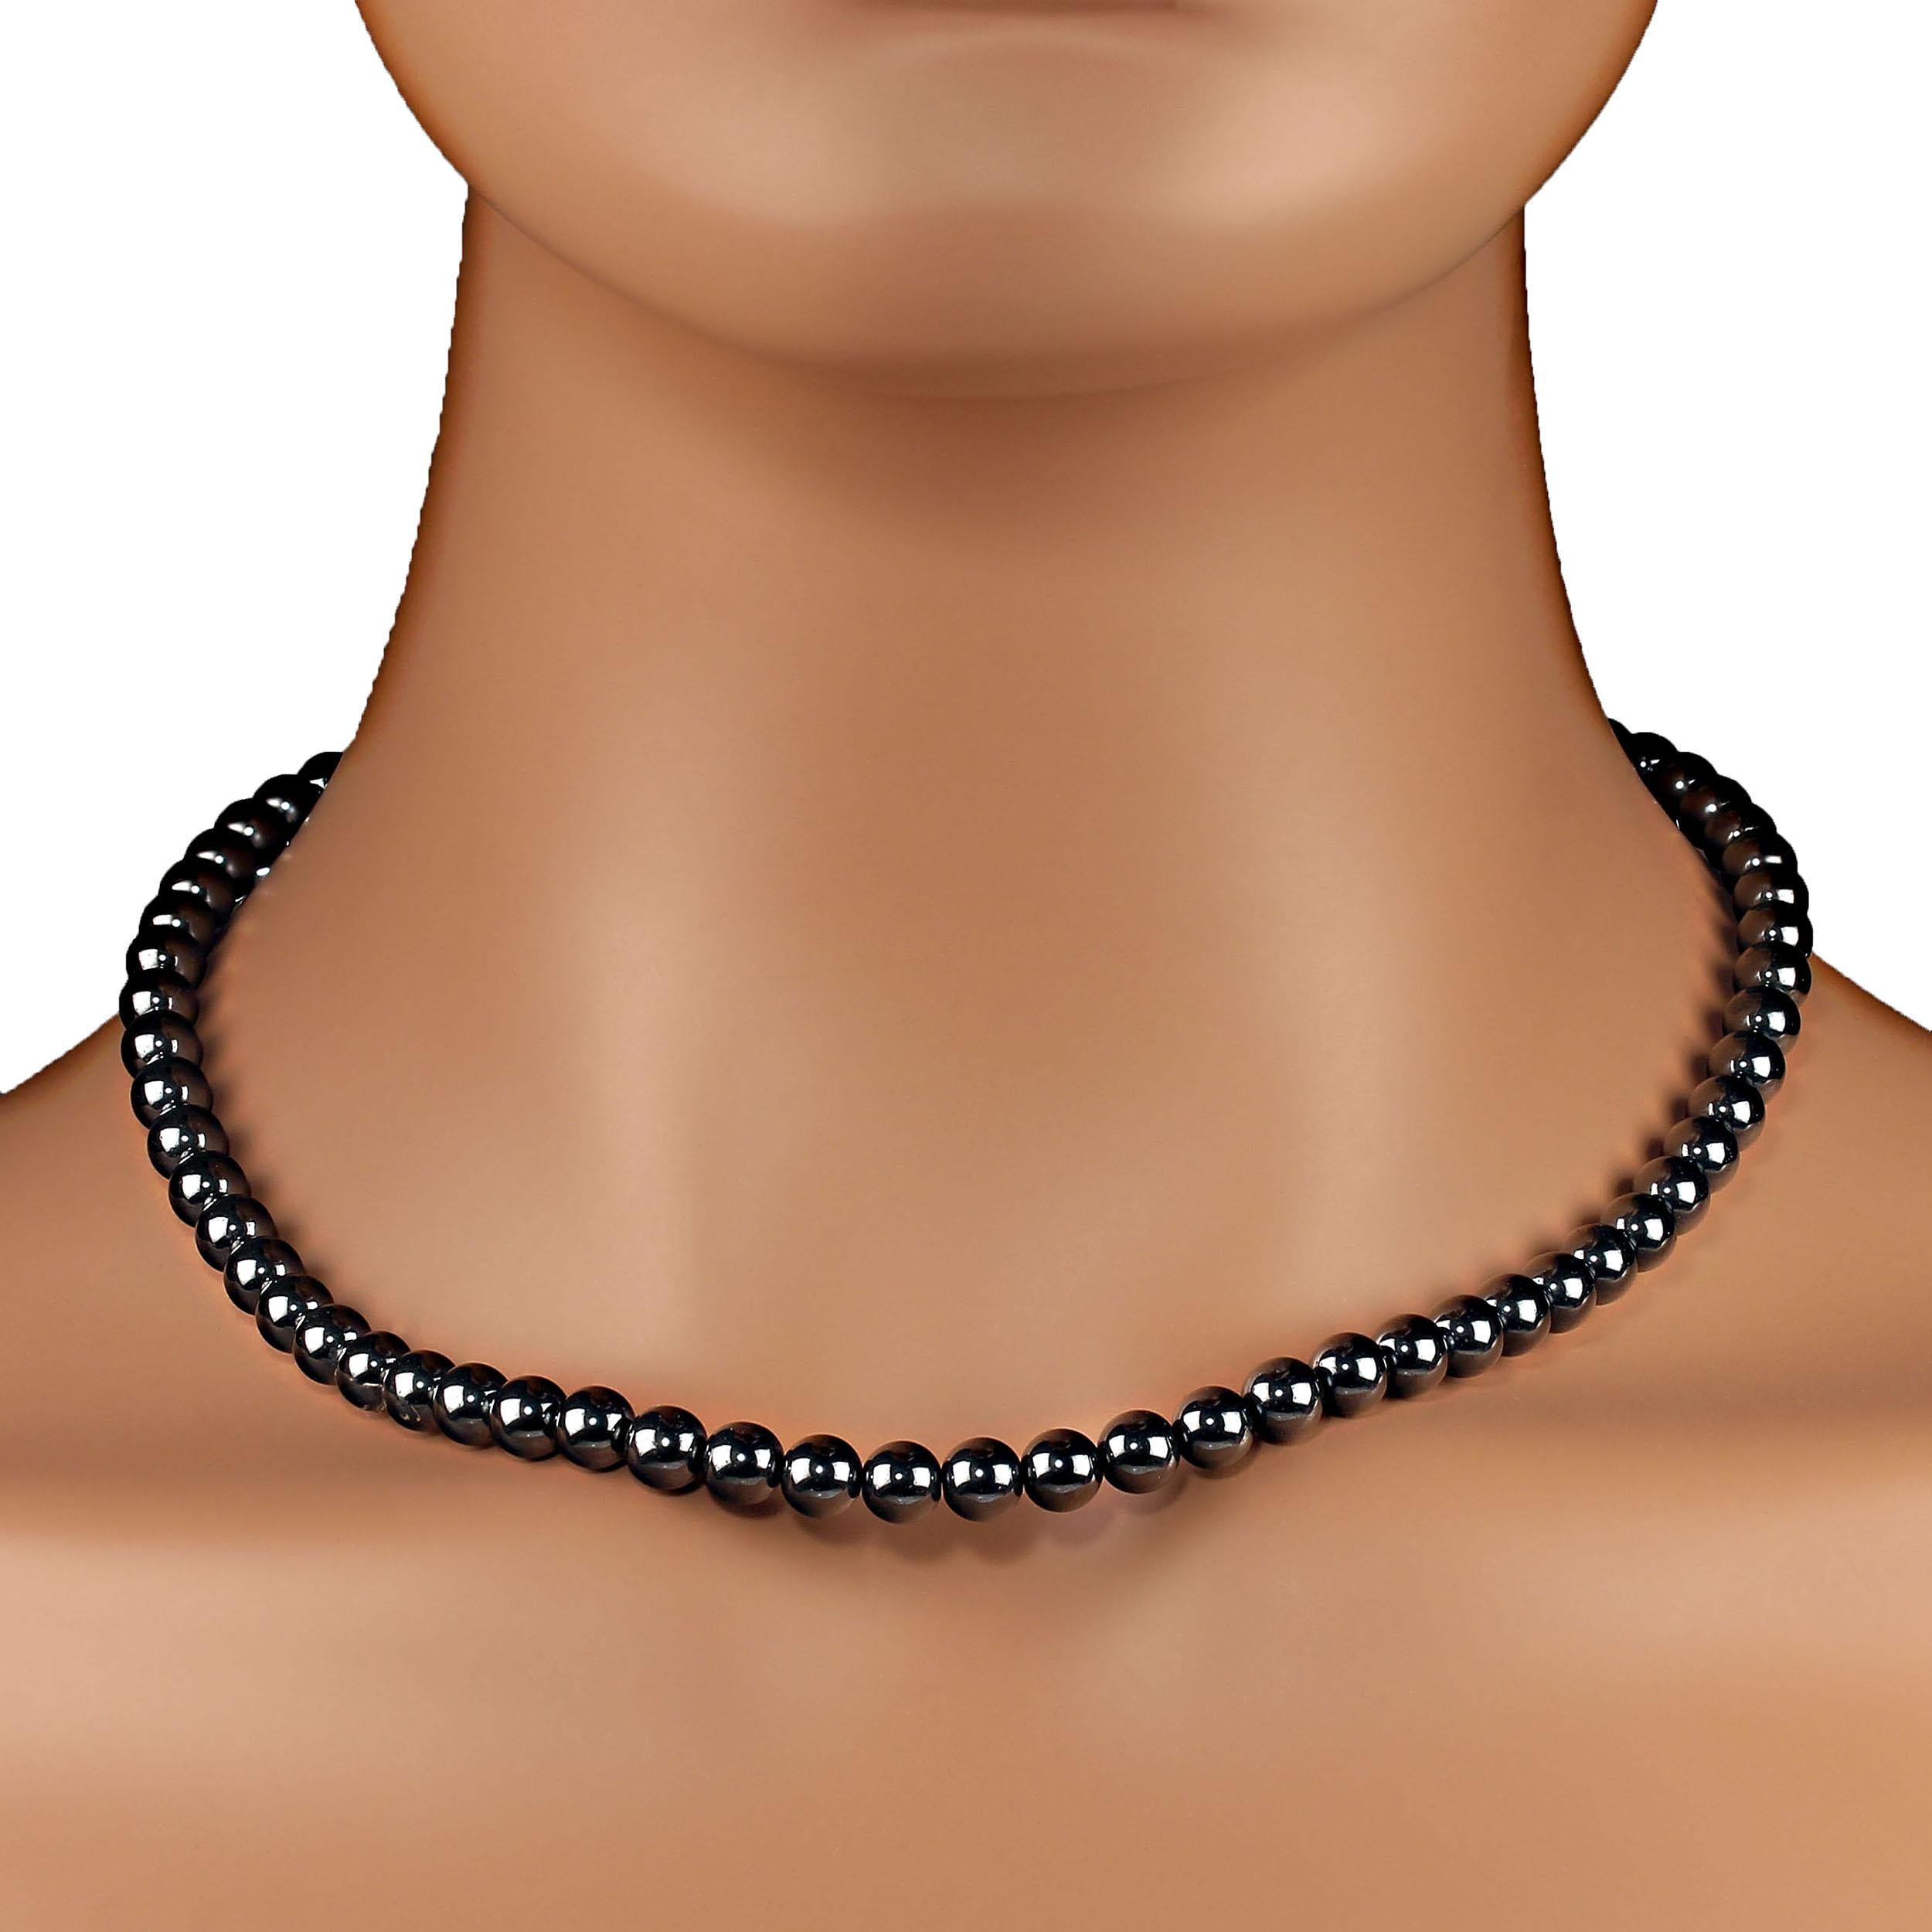 Artisan AJD 18 Inch Hematite Necklace with Silver Clasp    Perfect Gift! For Sale